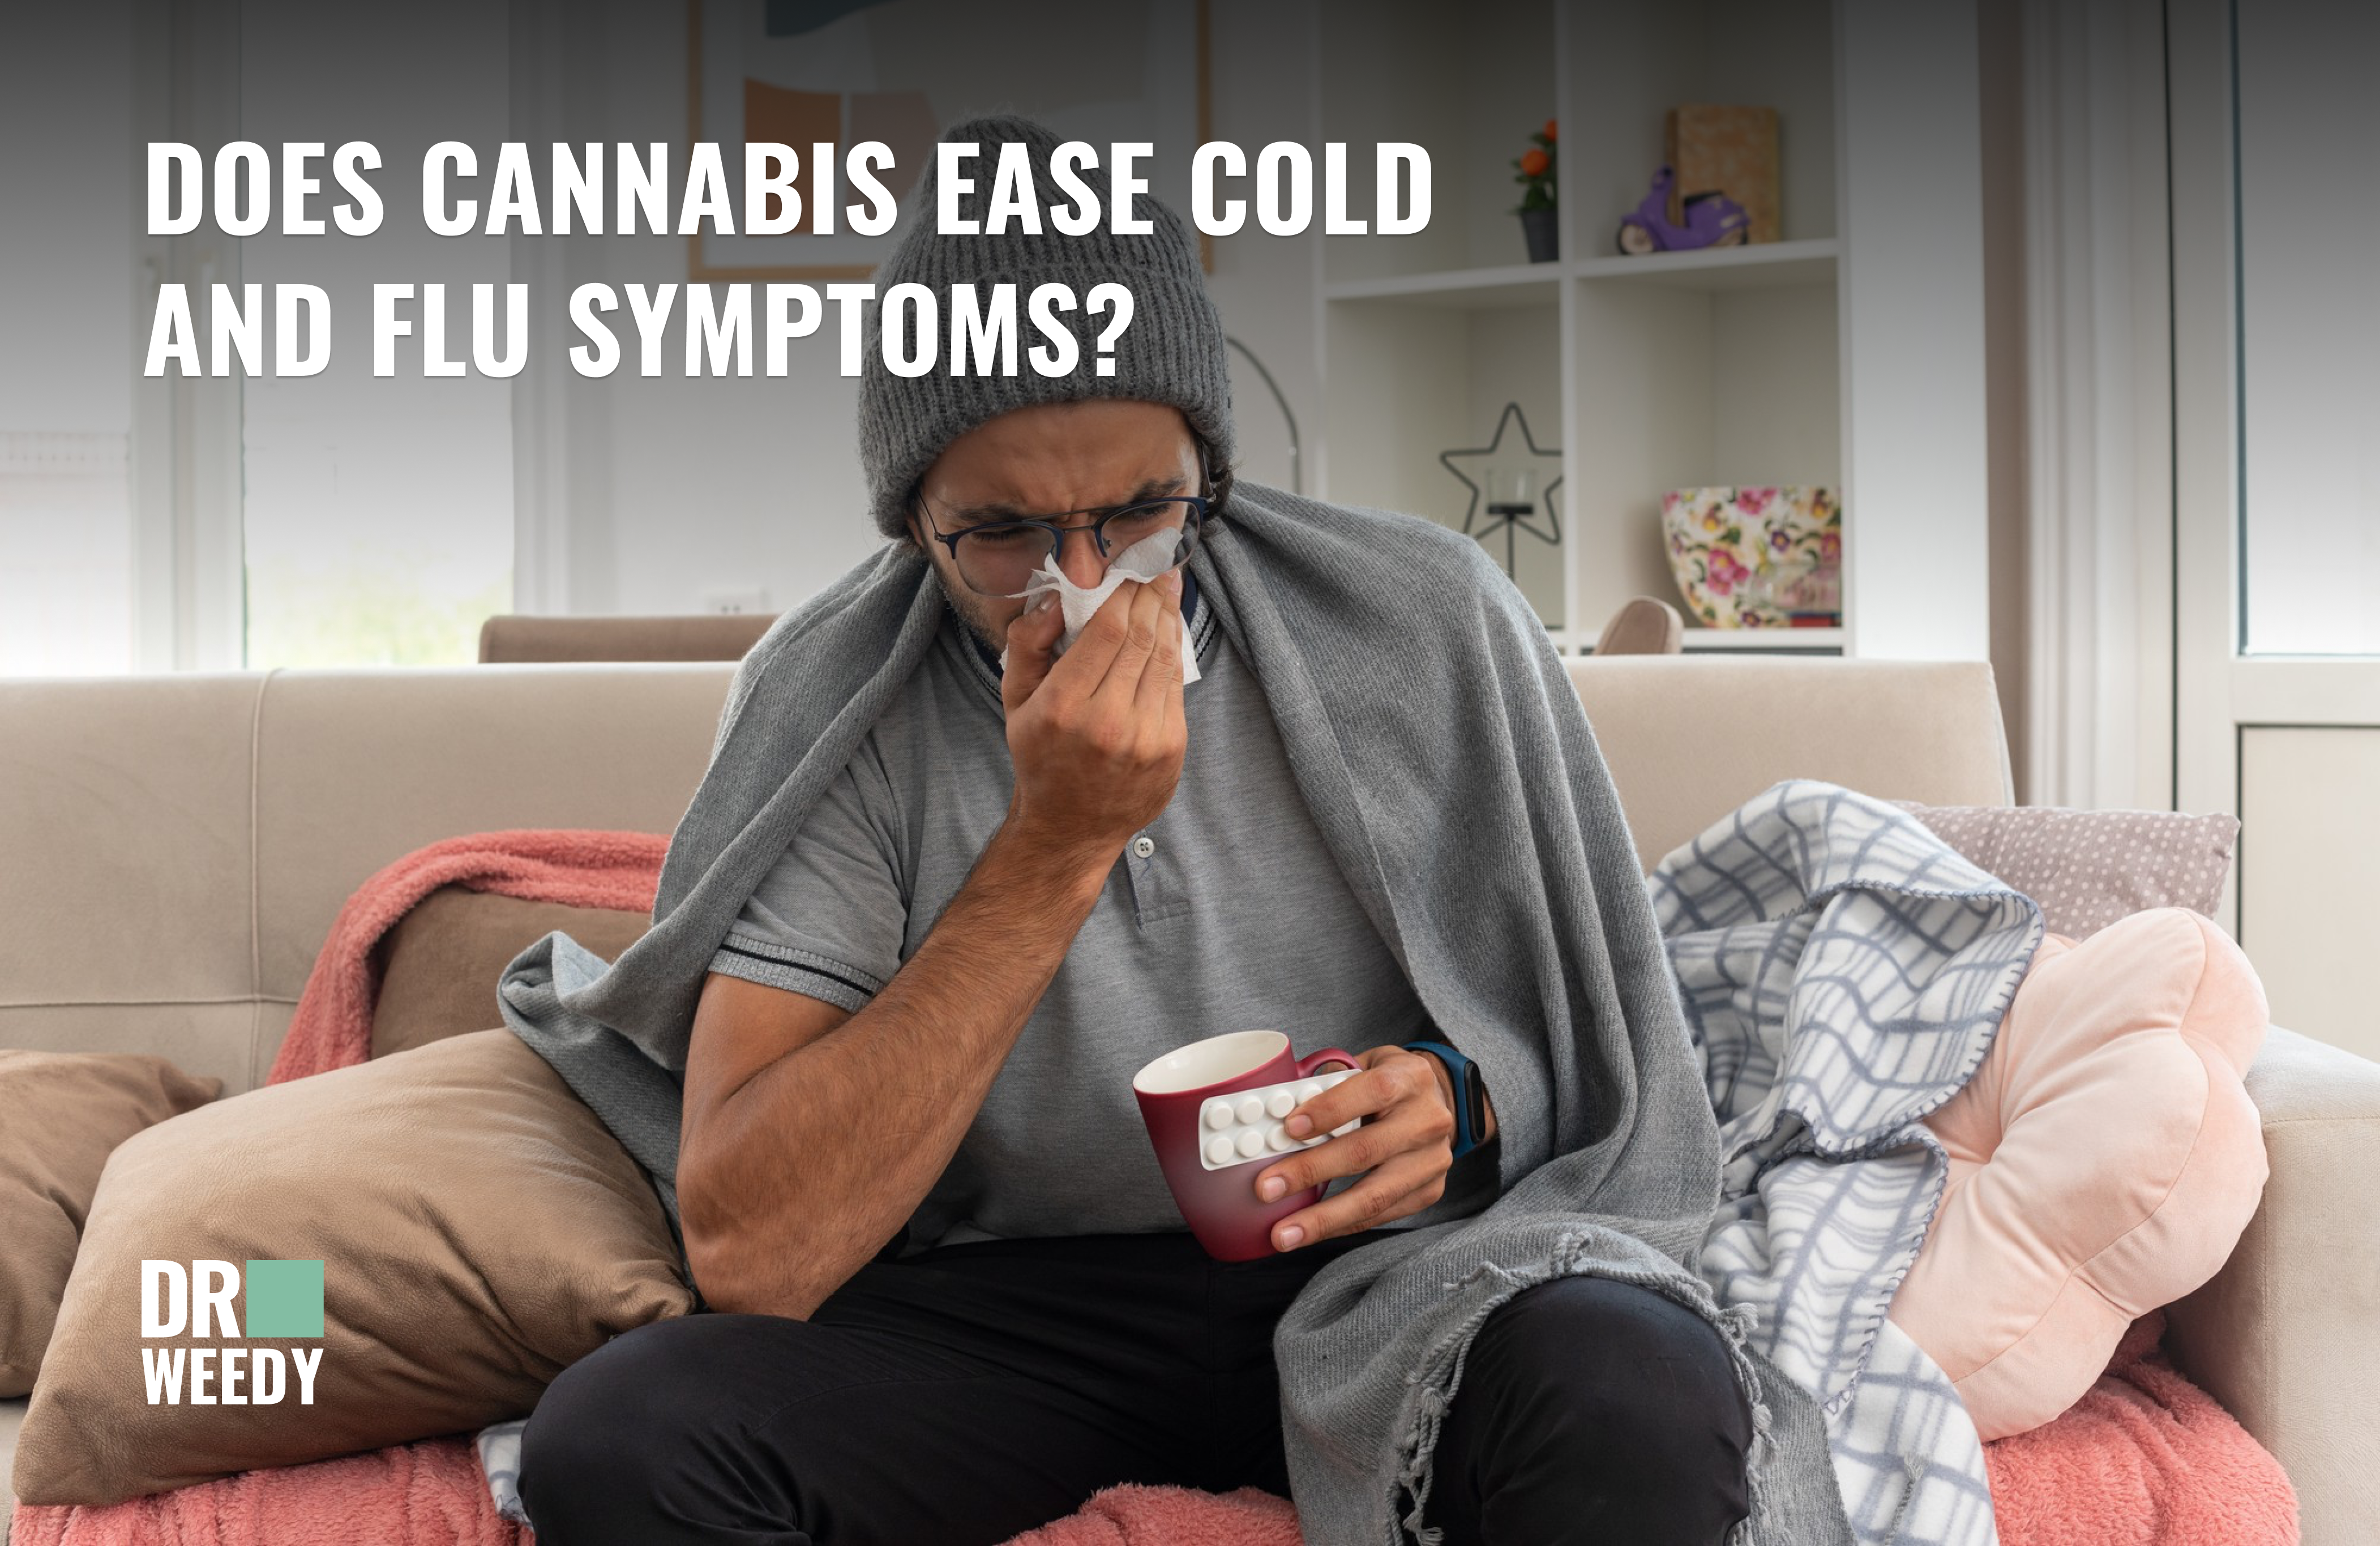 Does Cannabis Ease Cold and Flu Symptoms?